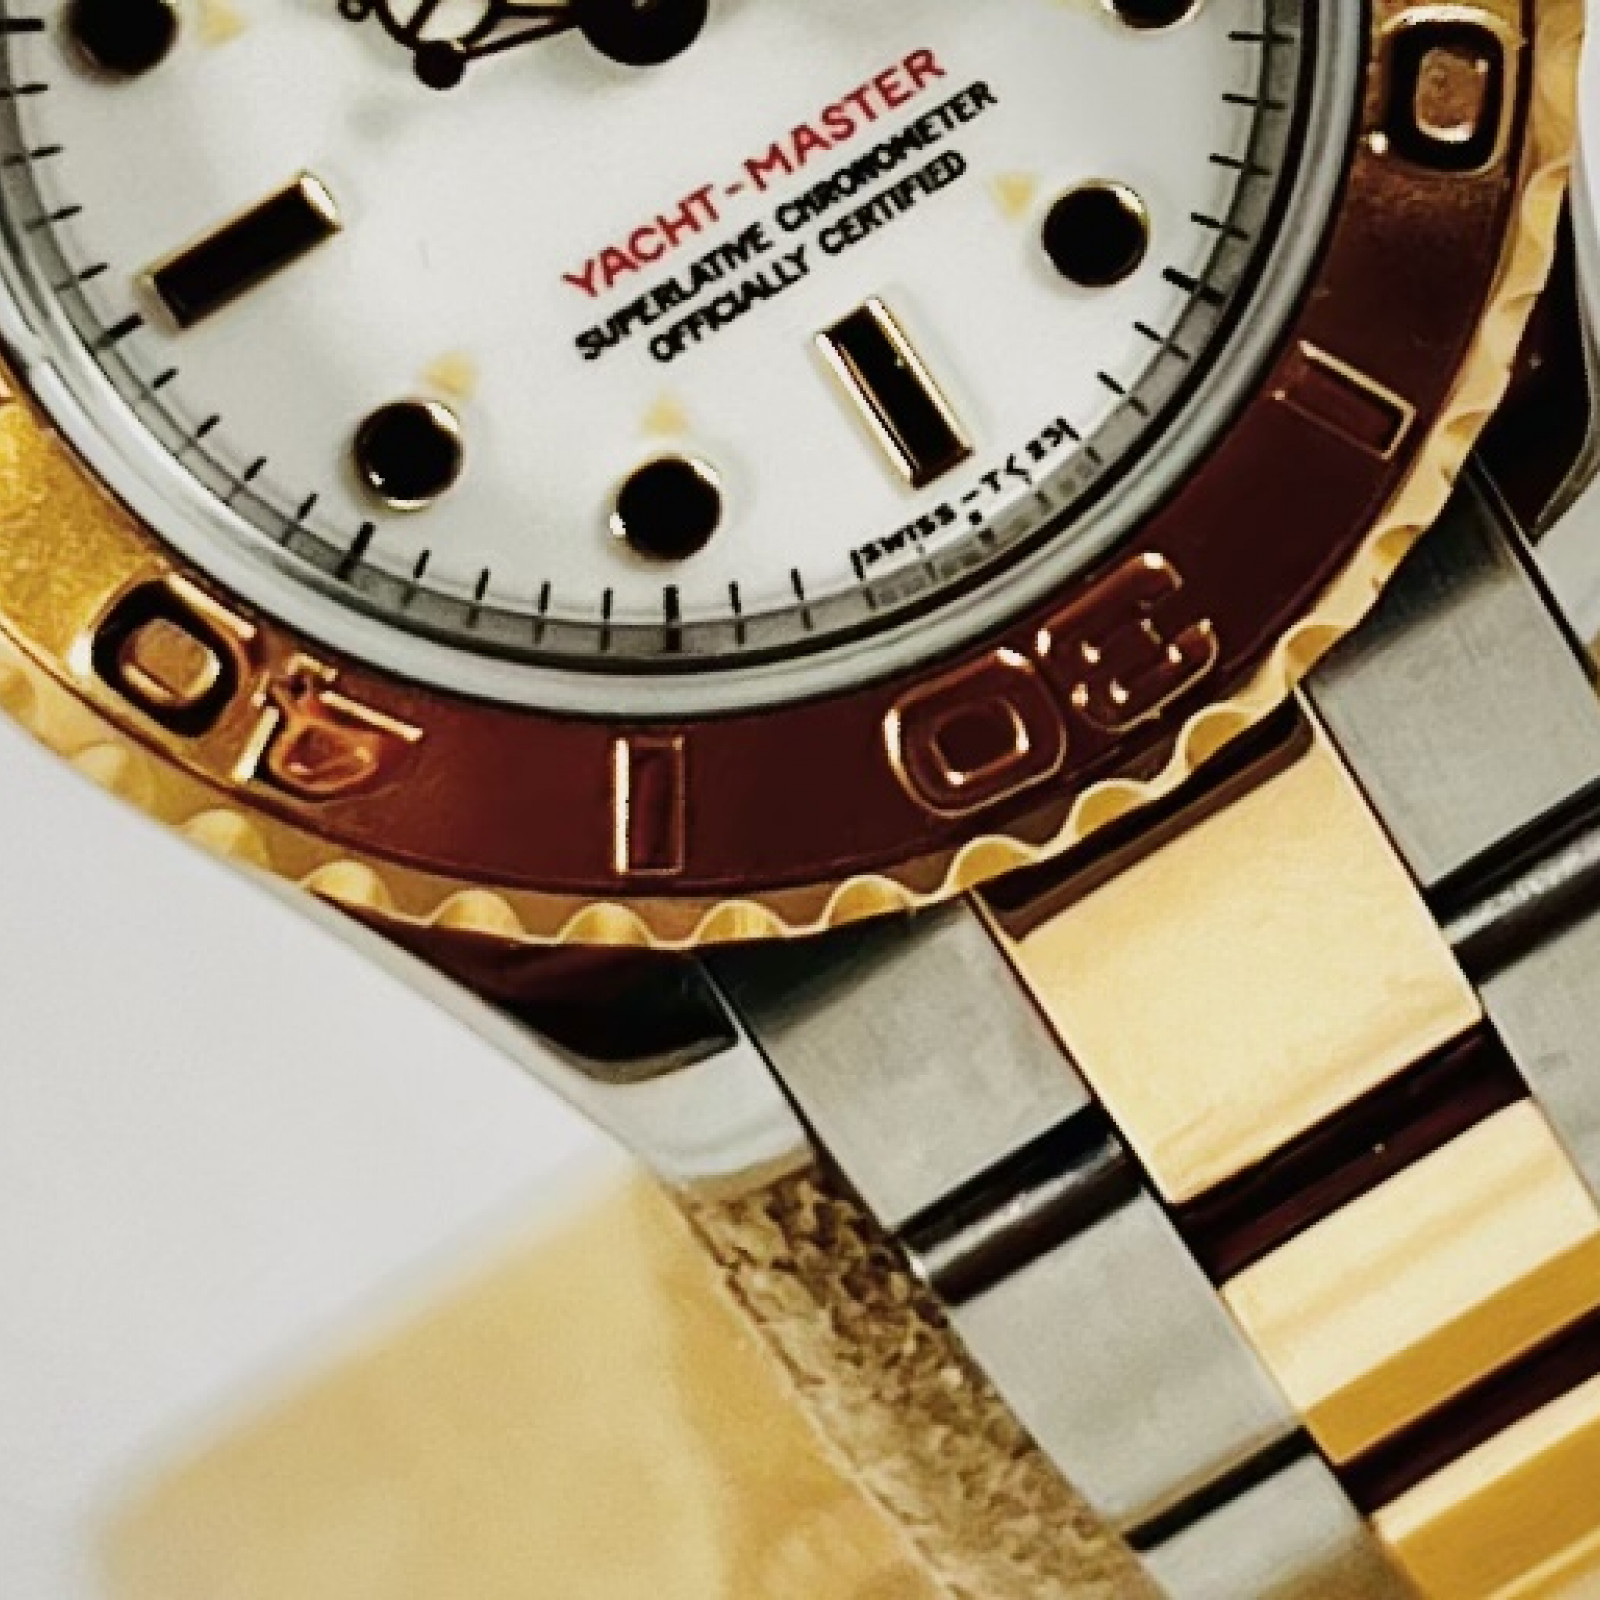 Pre-Owned Rolex Yacht-Master 69623